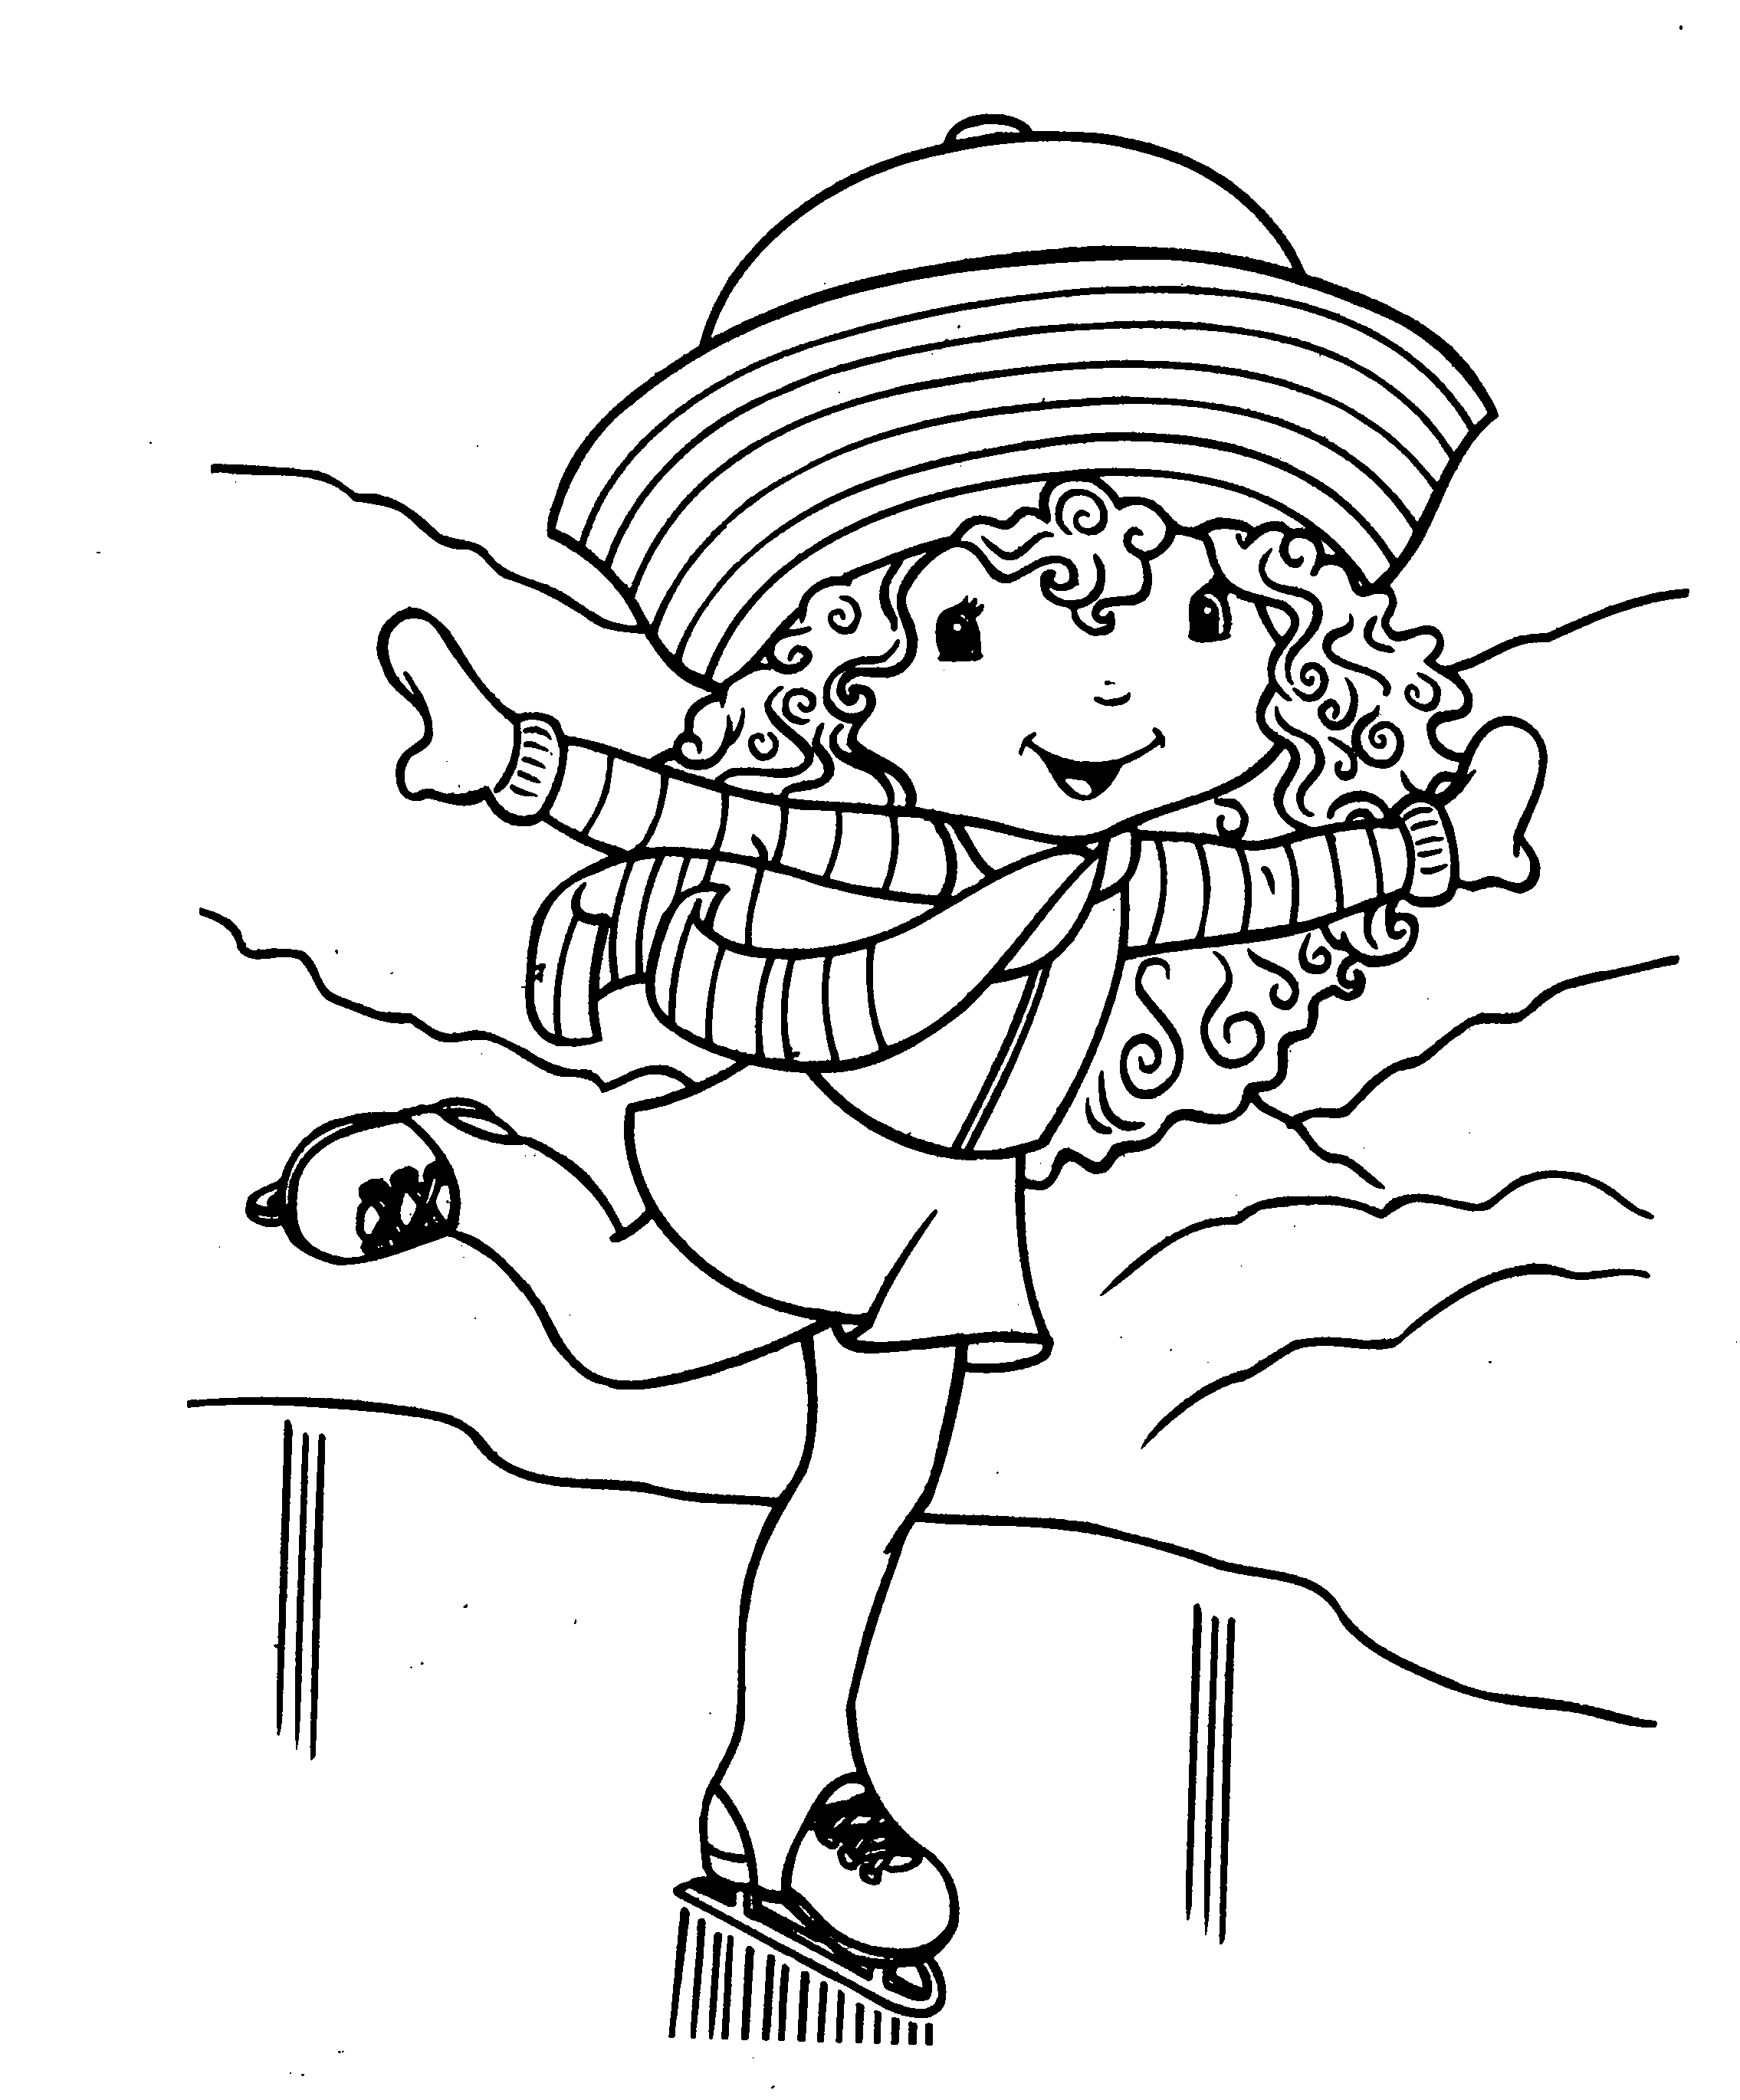 Strawberry shortcake coloring pages